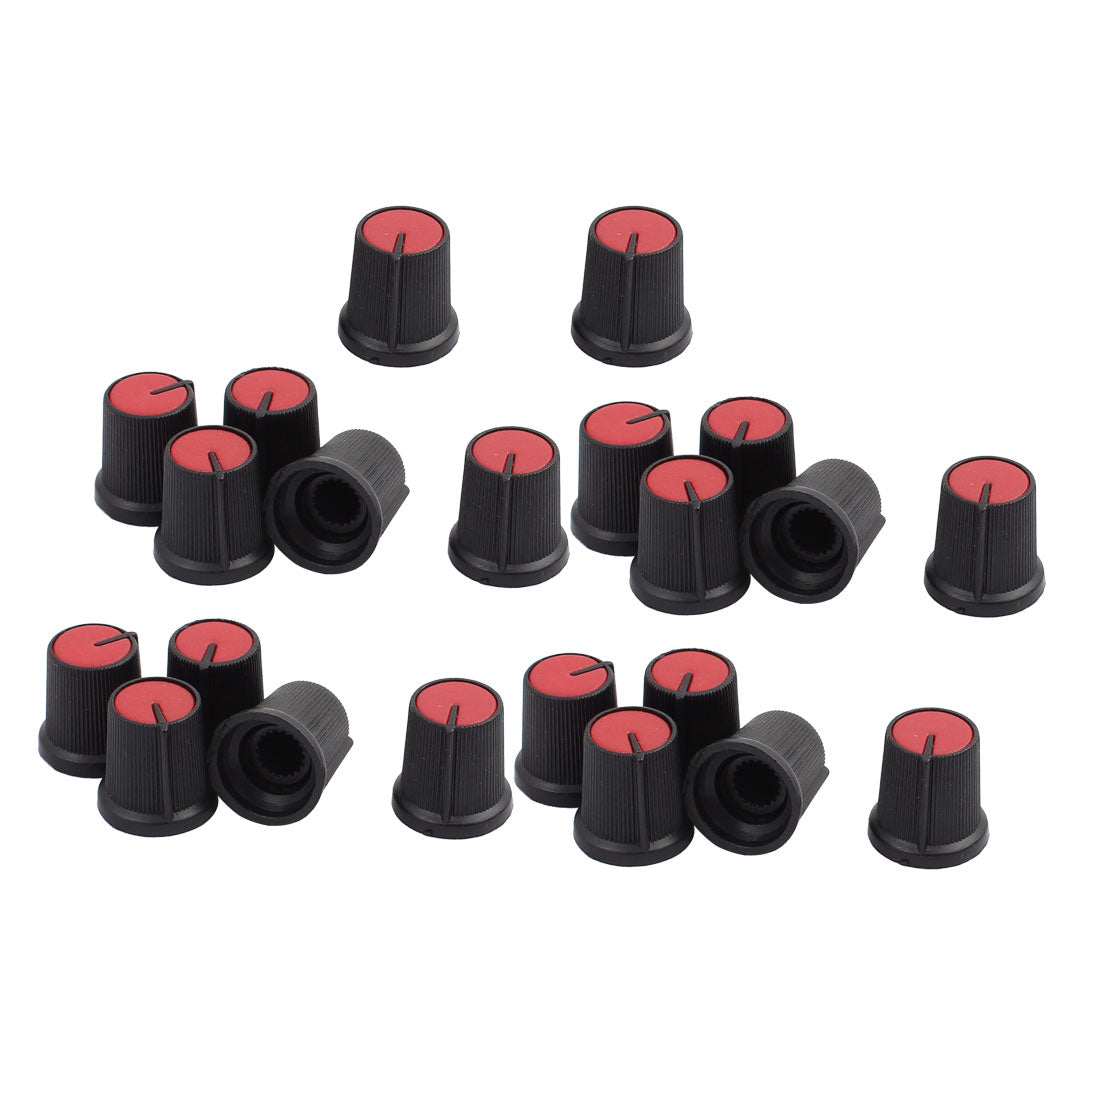 uxcell Uxcell 22pcs 15mmx16mm Potentiometer Mixer Control Knob Red